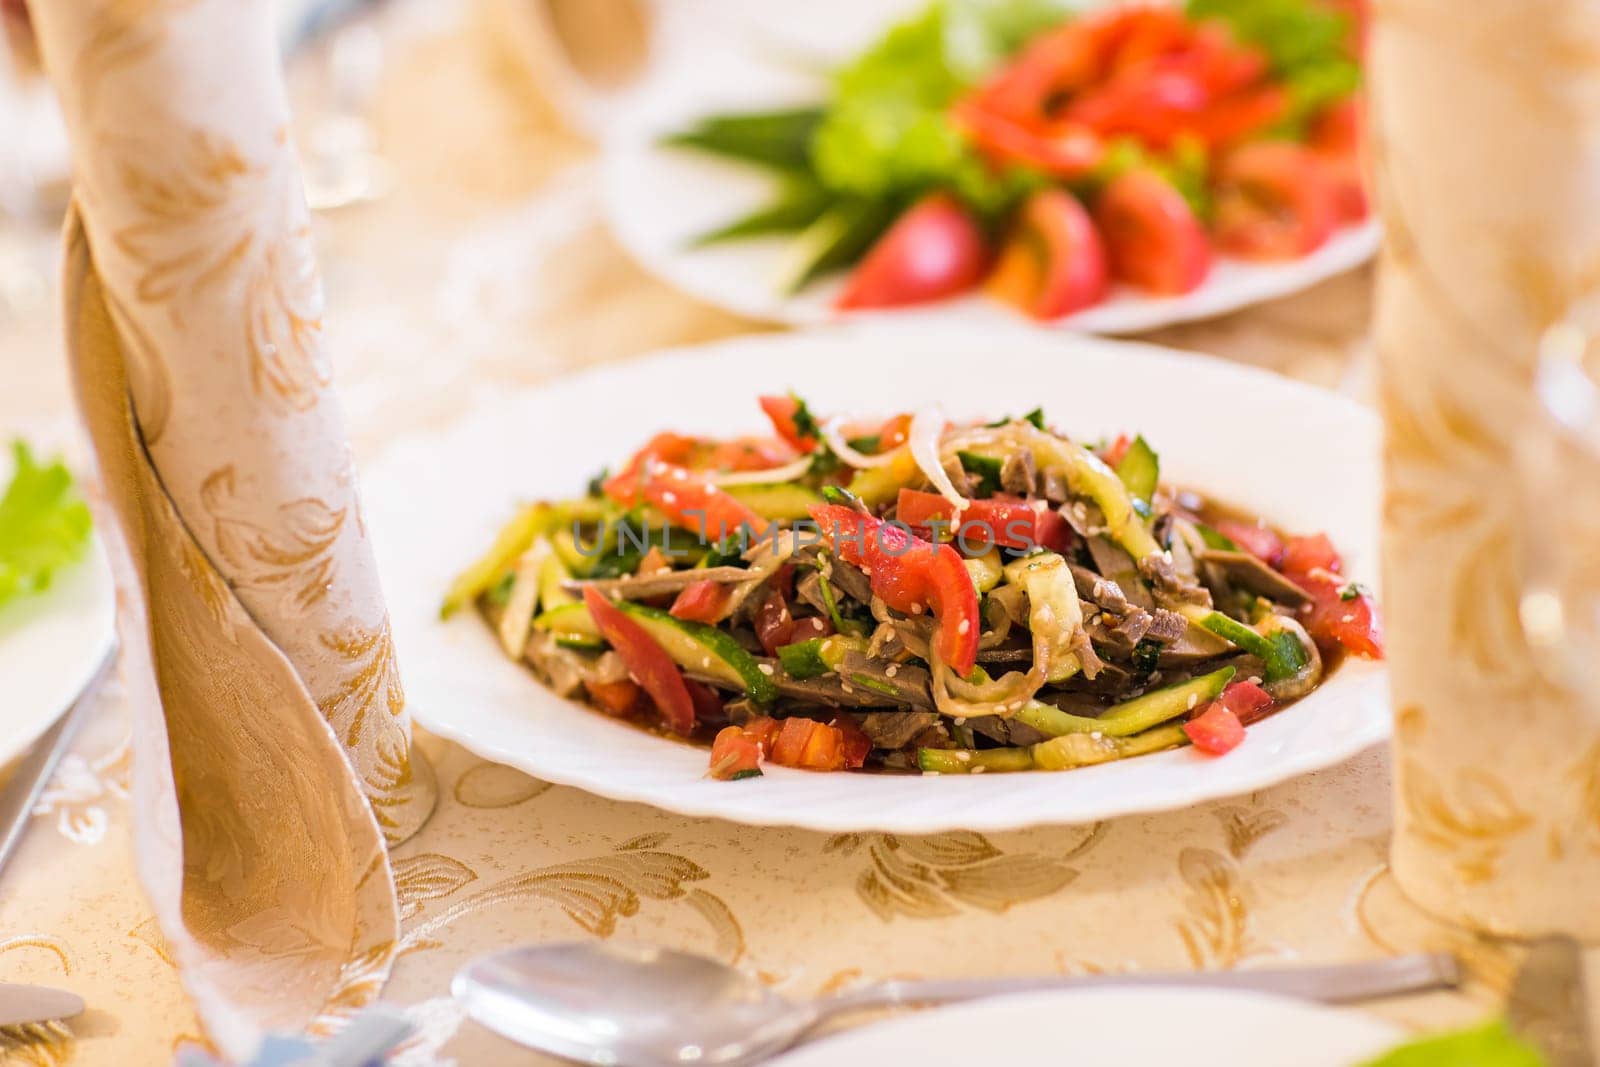 Salad with meat, mushrooms and tomatoes. Festive table